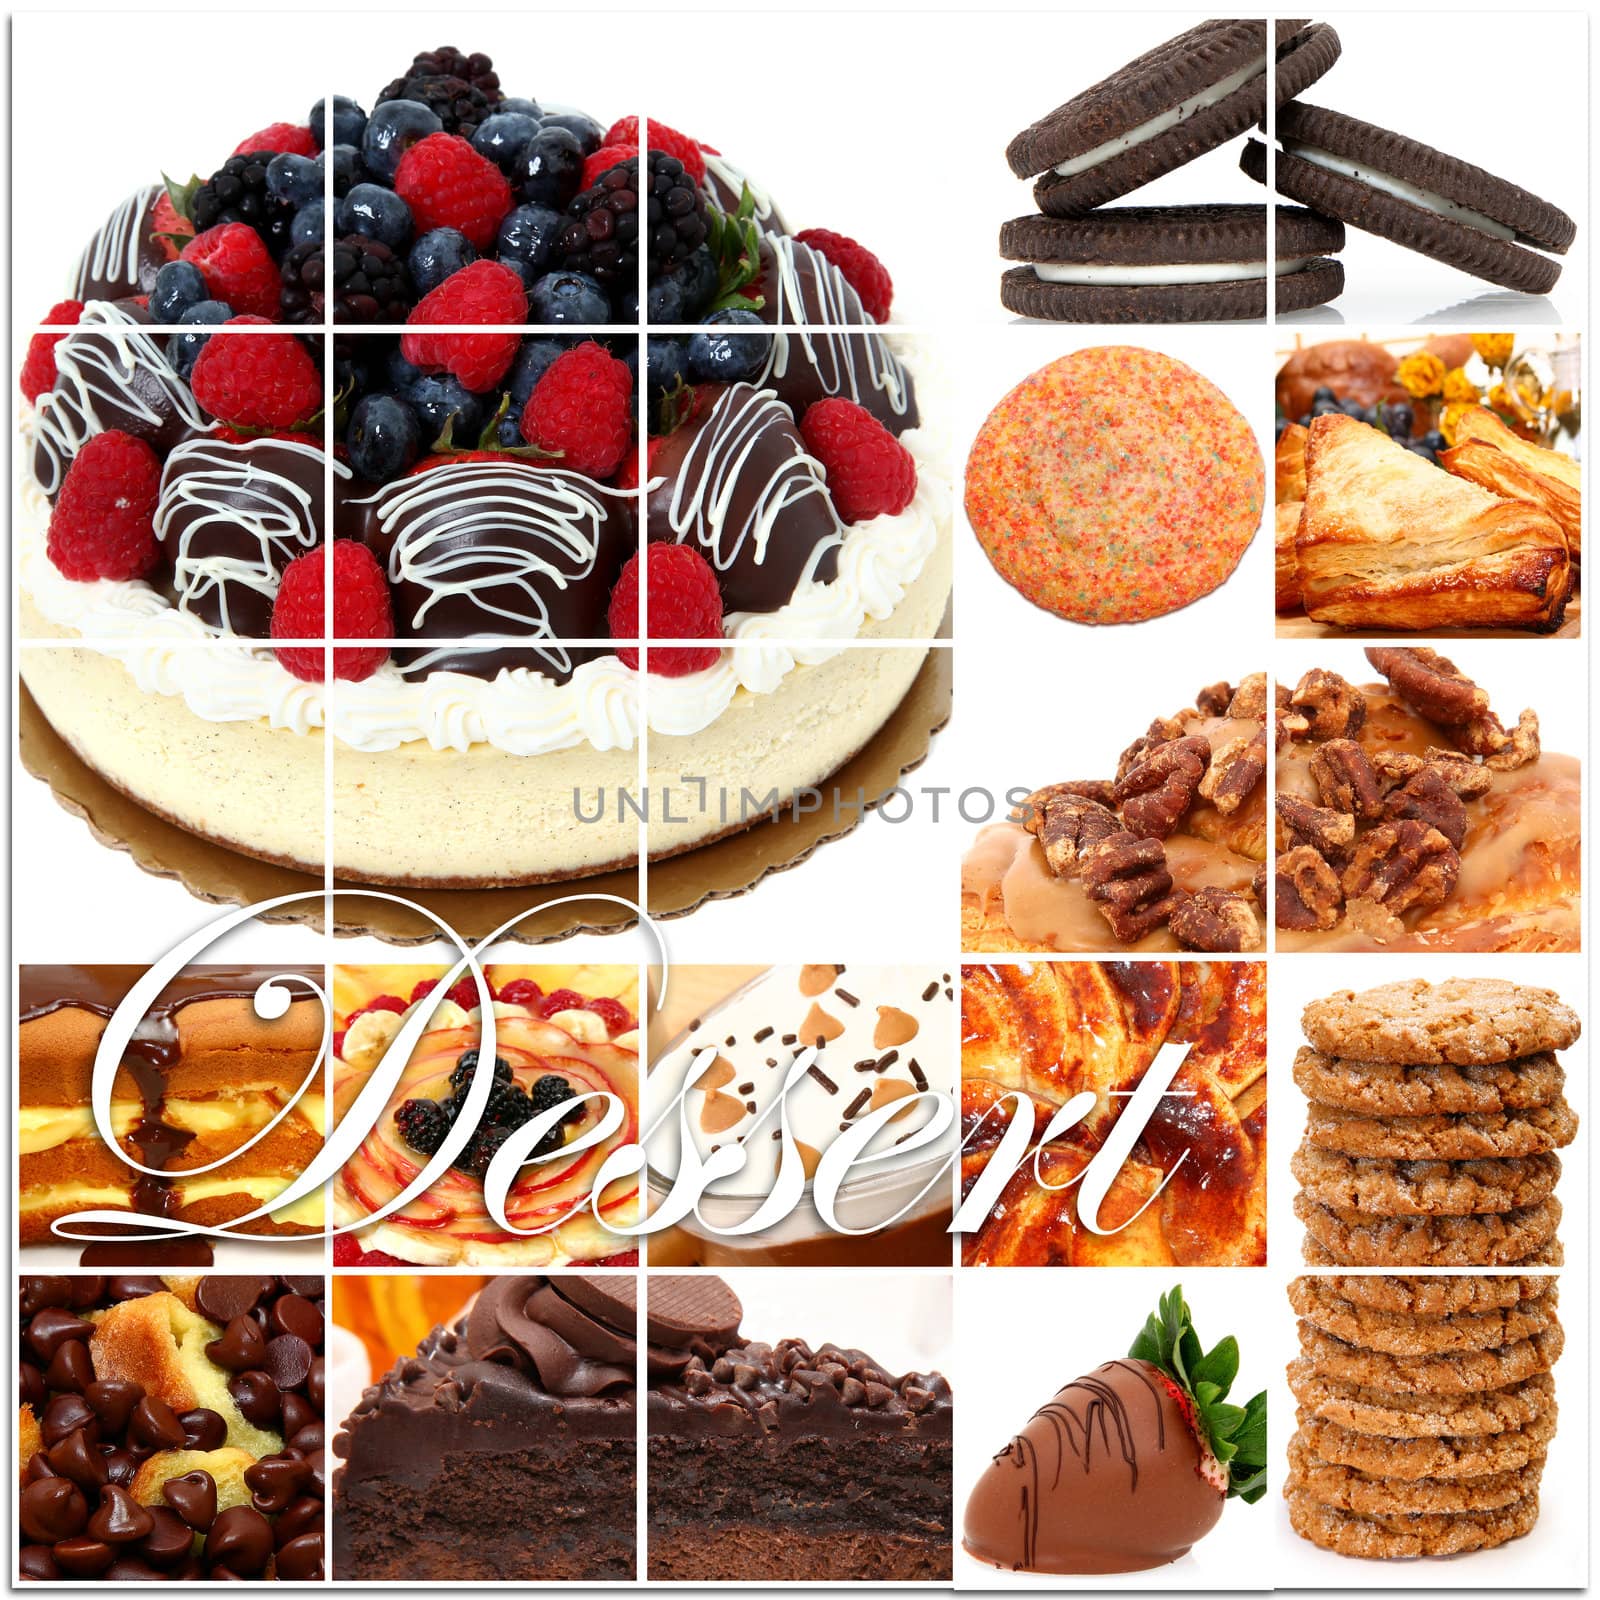 Dessert collage including cakes, fruit, pies, pastry, cookies and more over white.